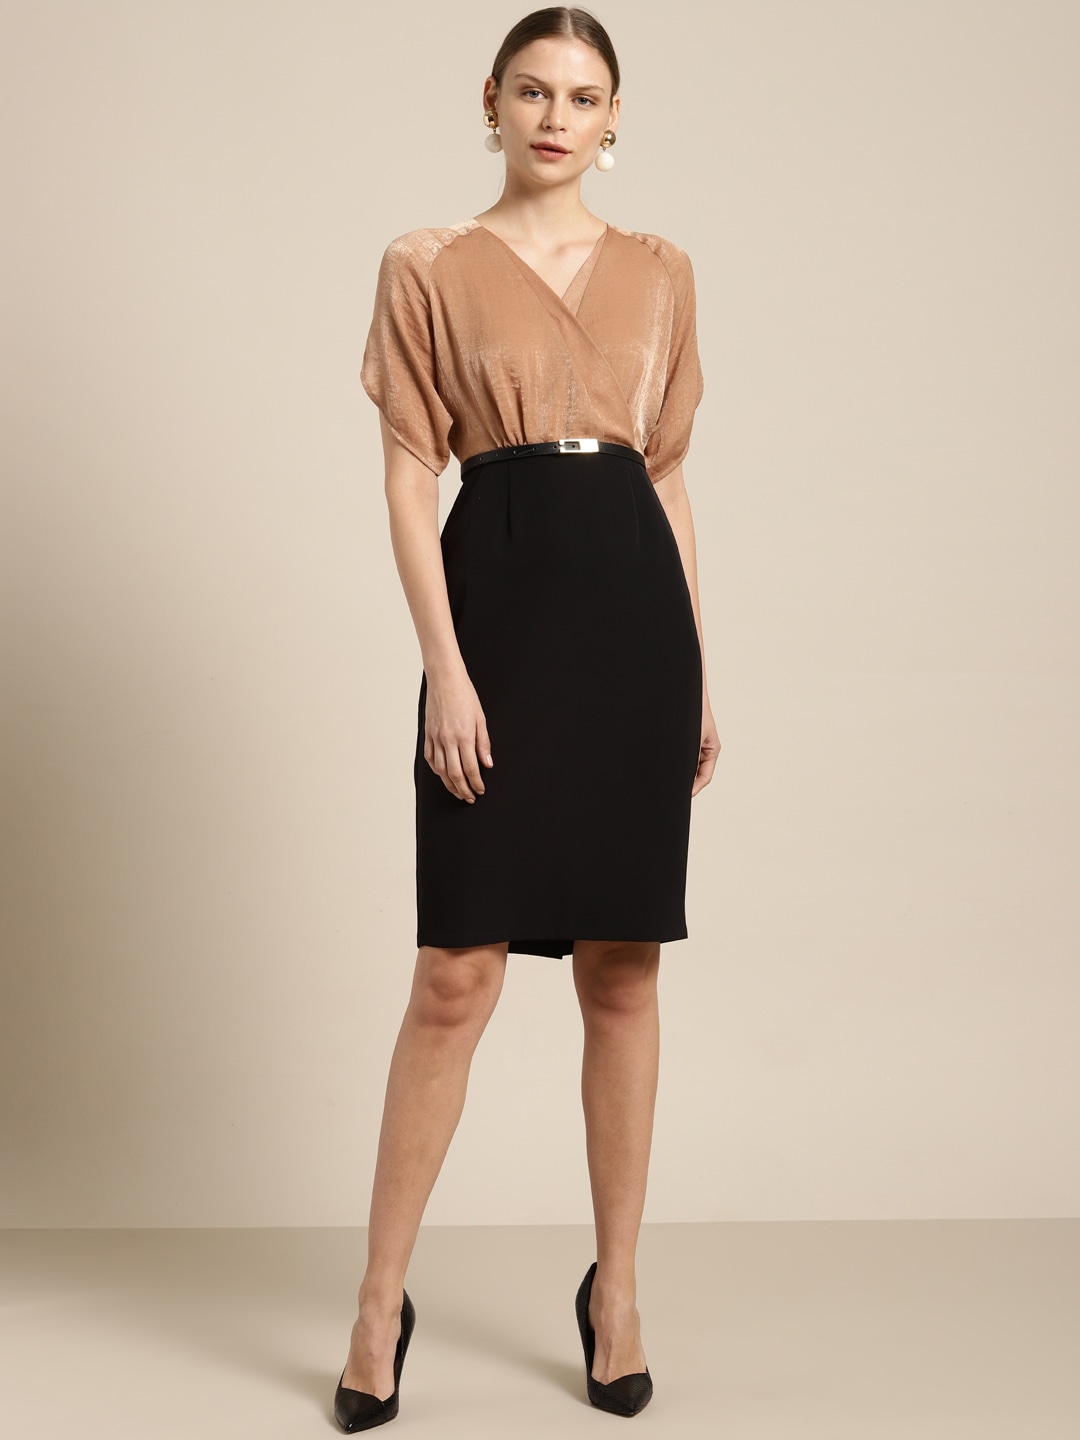 Beige and black dress - top 14 dresses from Myntra for coolest parties ever